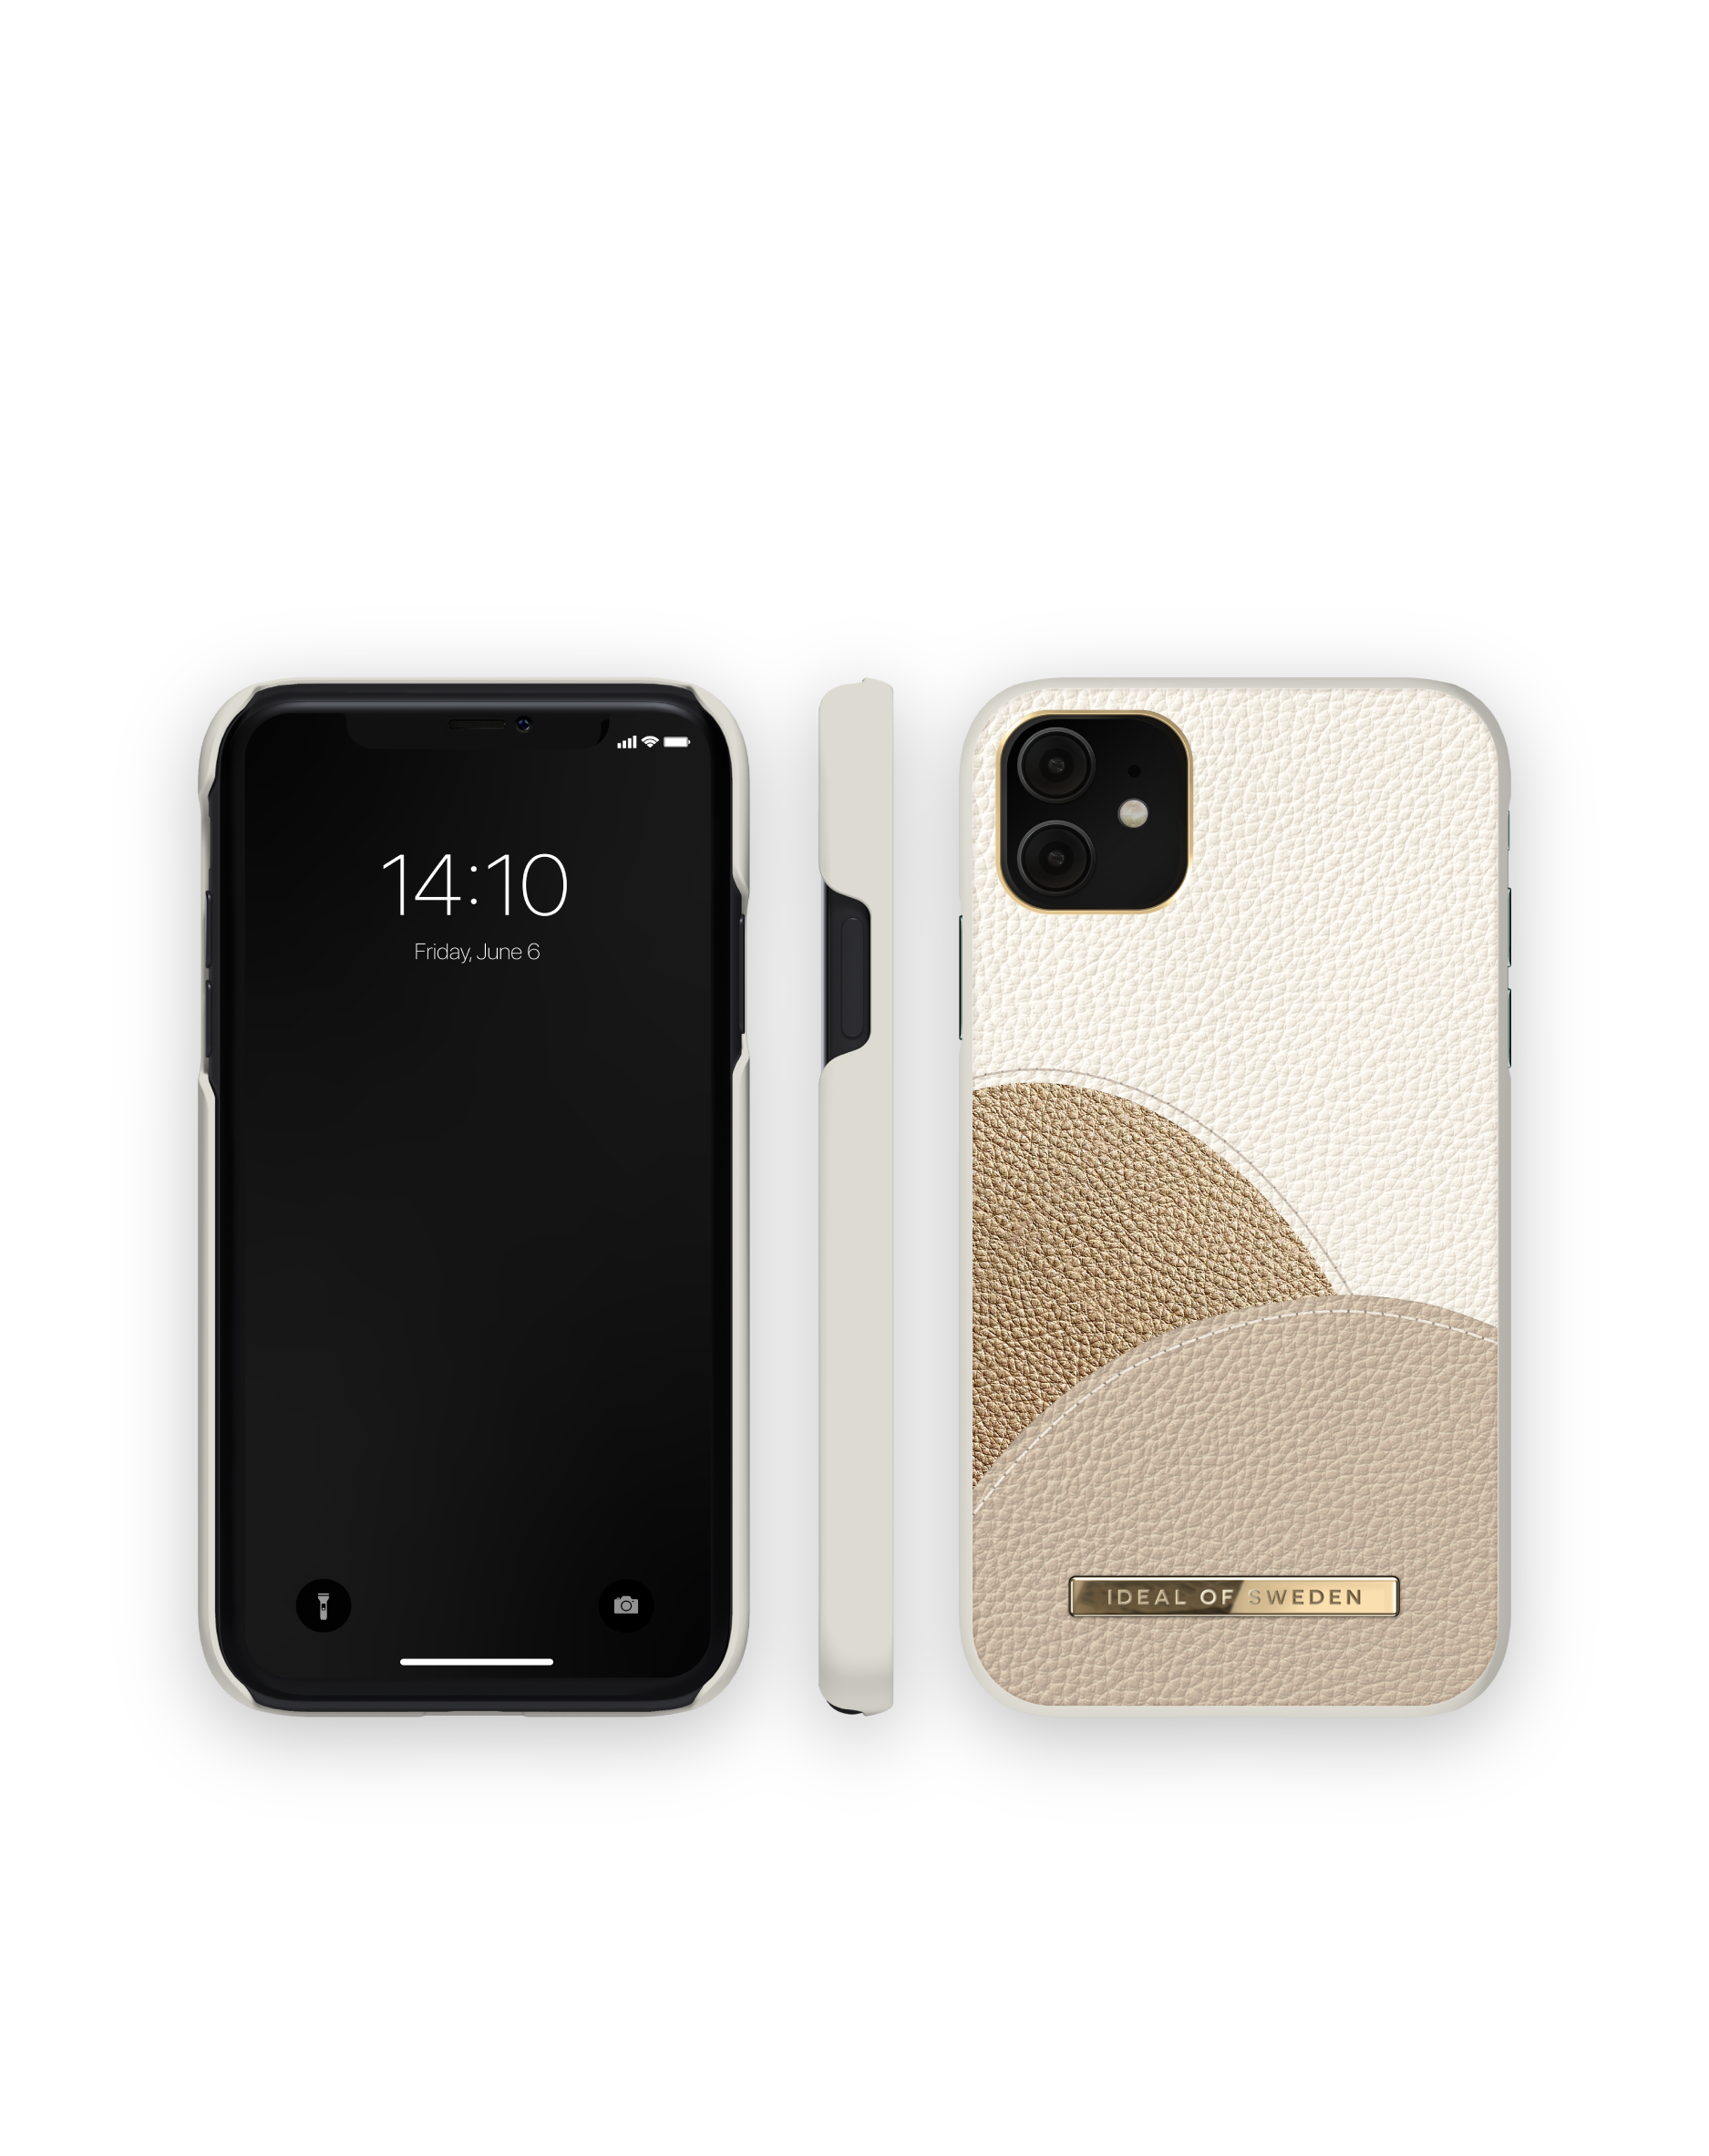 OF Caramel iPhone 11, IDACSS20-I1961-214, SWEDEN iPhone XR, IDEAL Apple, Cloudy Backcover,